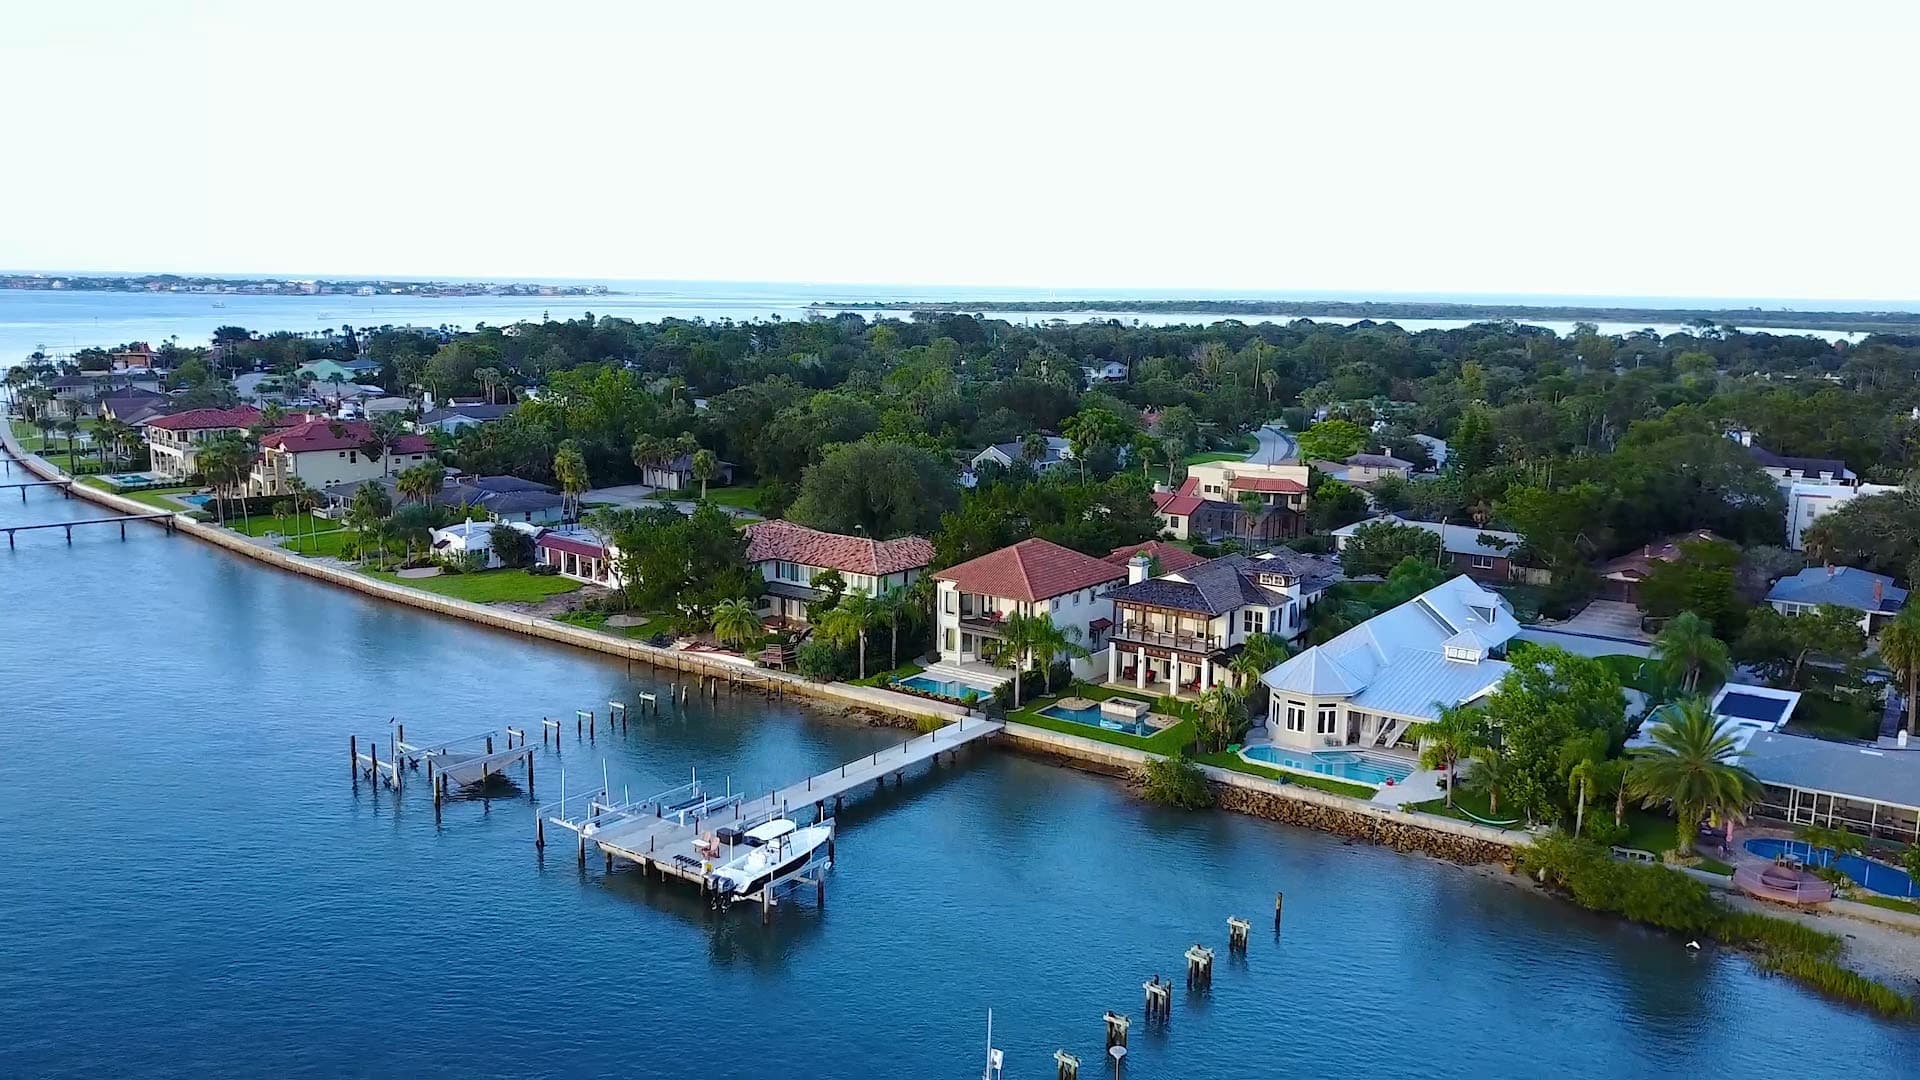 Aerial view of multiple properties surrounded by large trees on the water